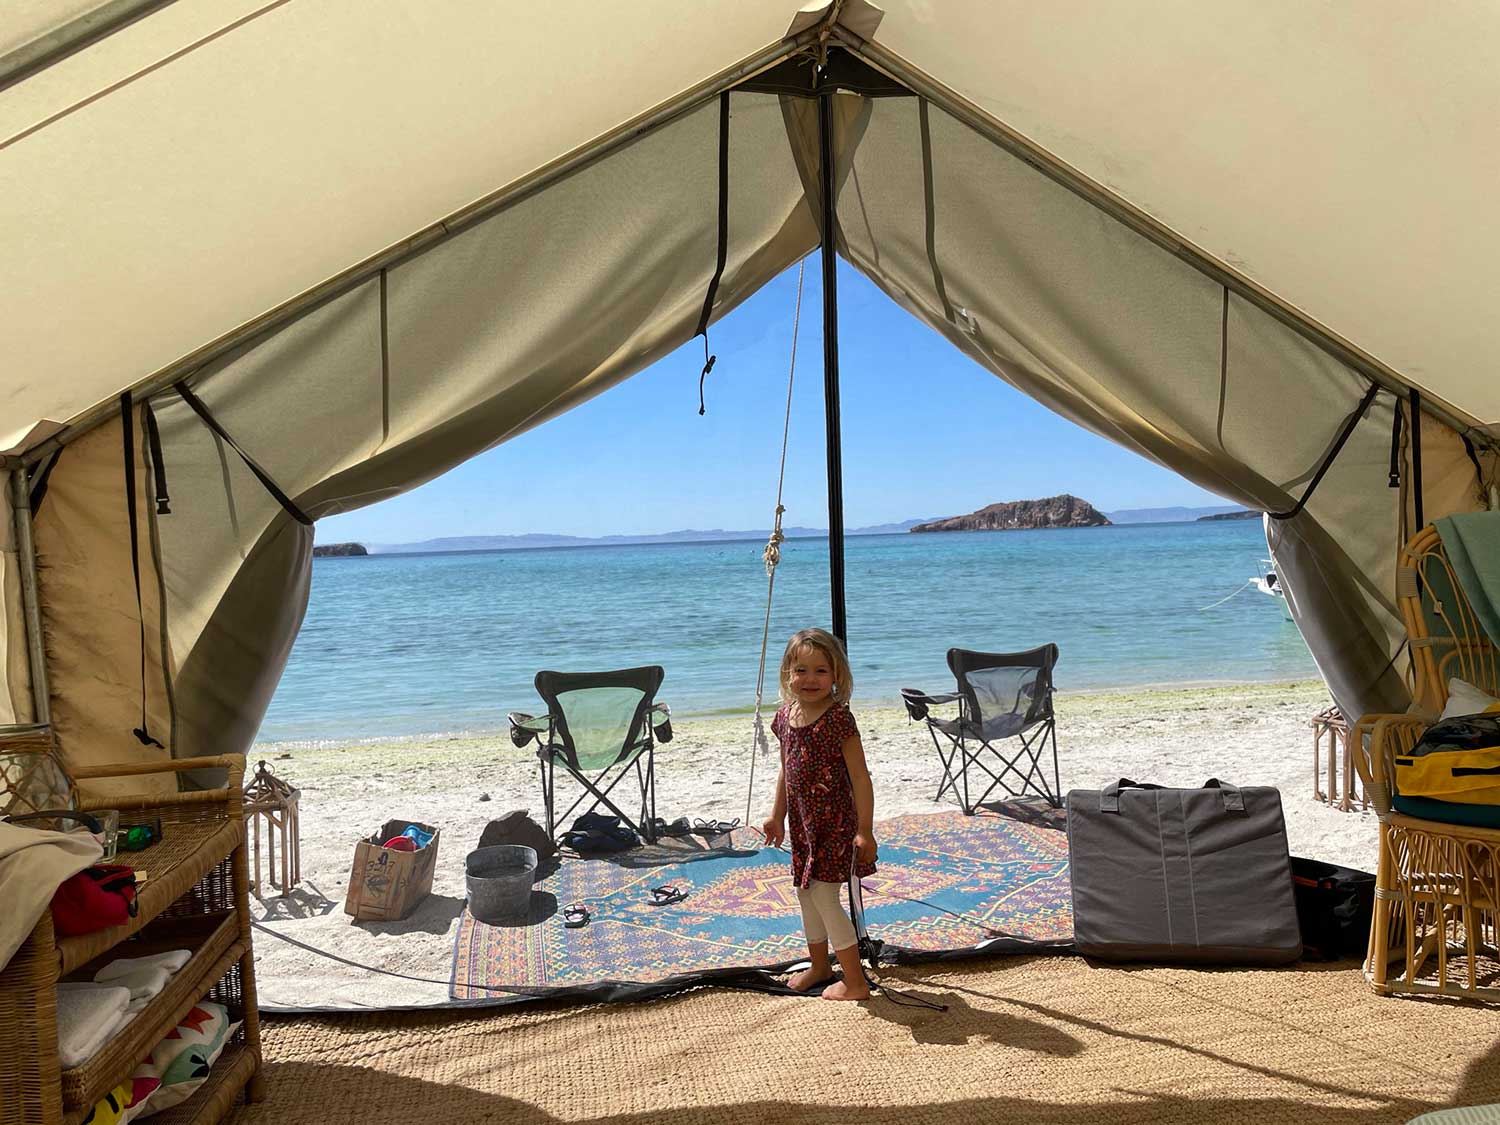 The inside of a camping tent on a beach.